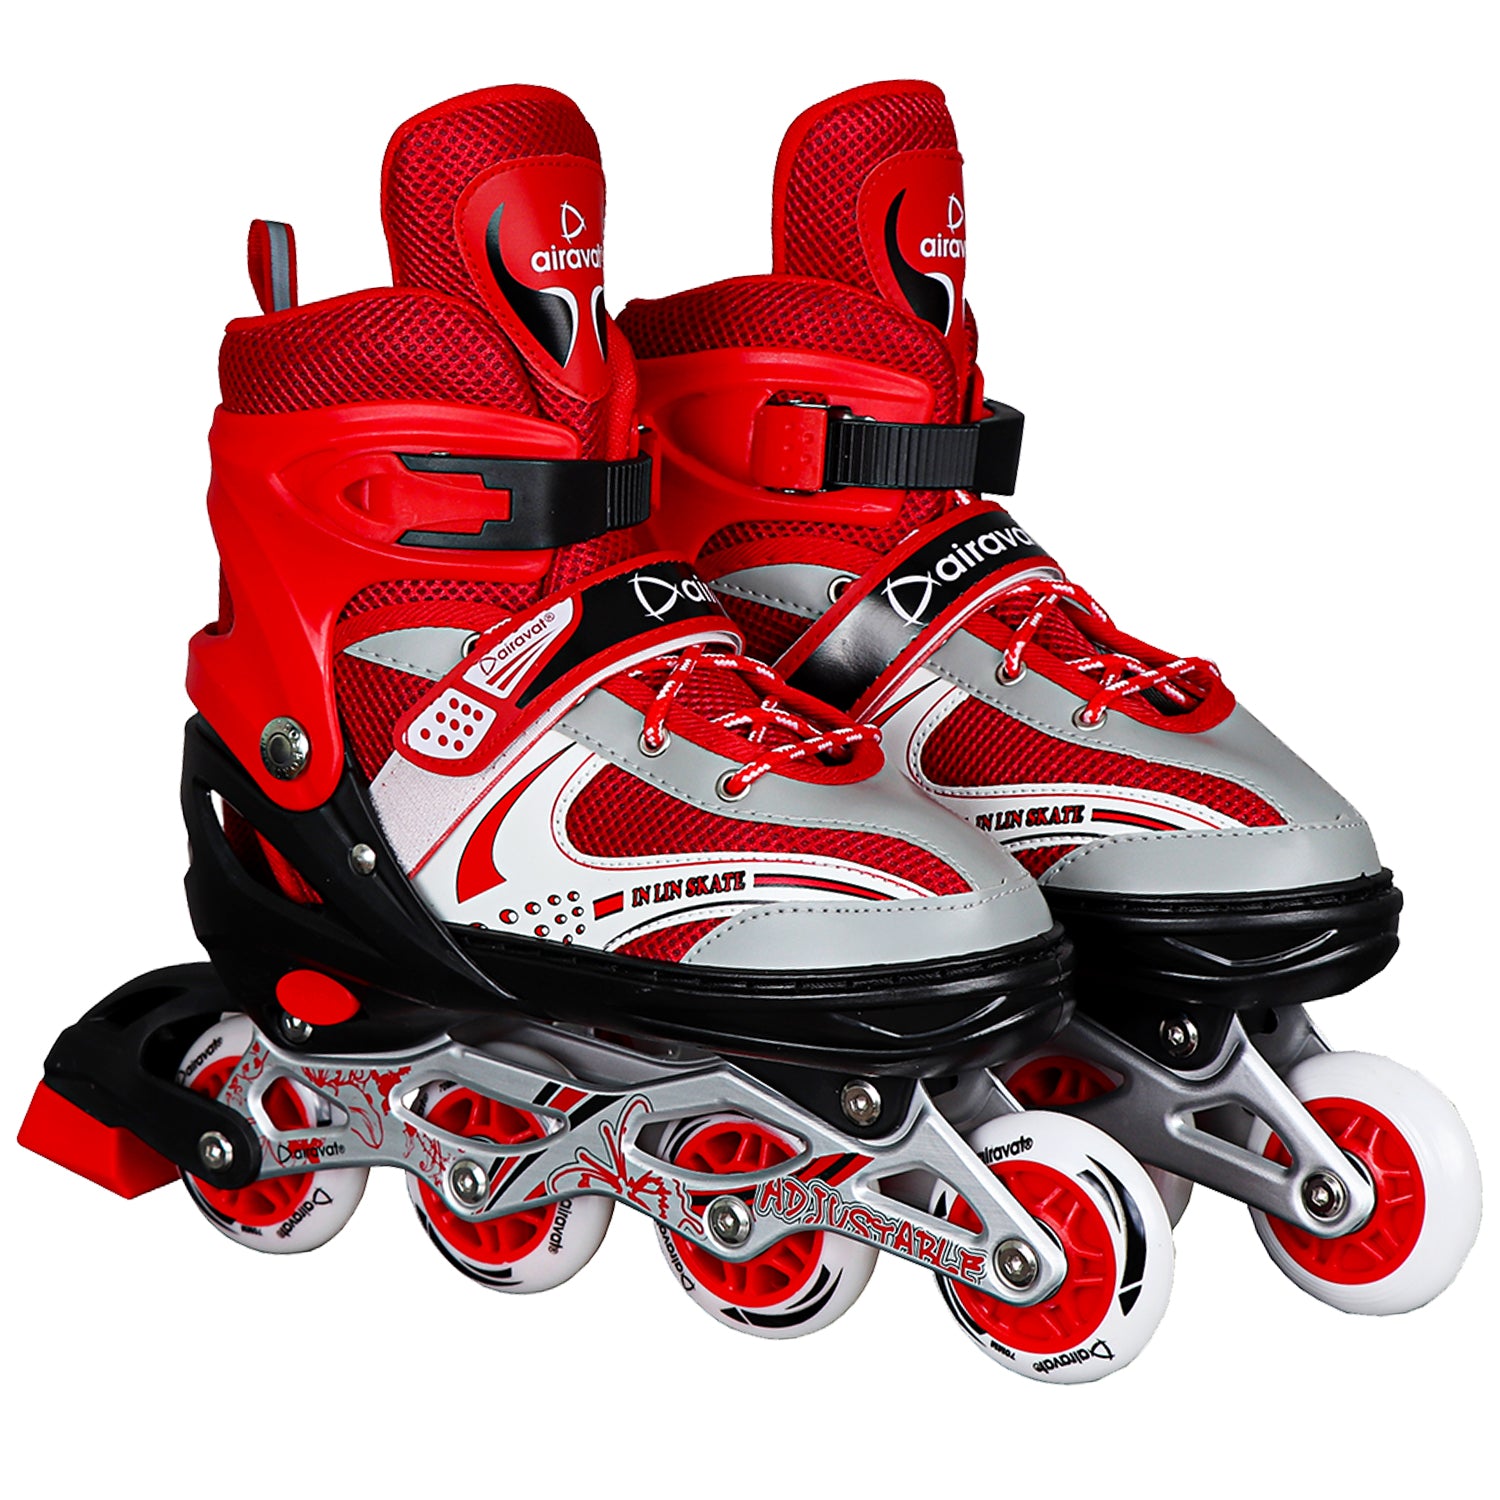 inline-skate-7704-roady-main-image-red